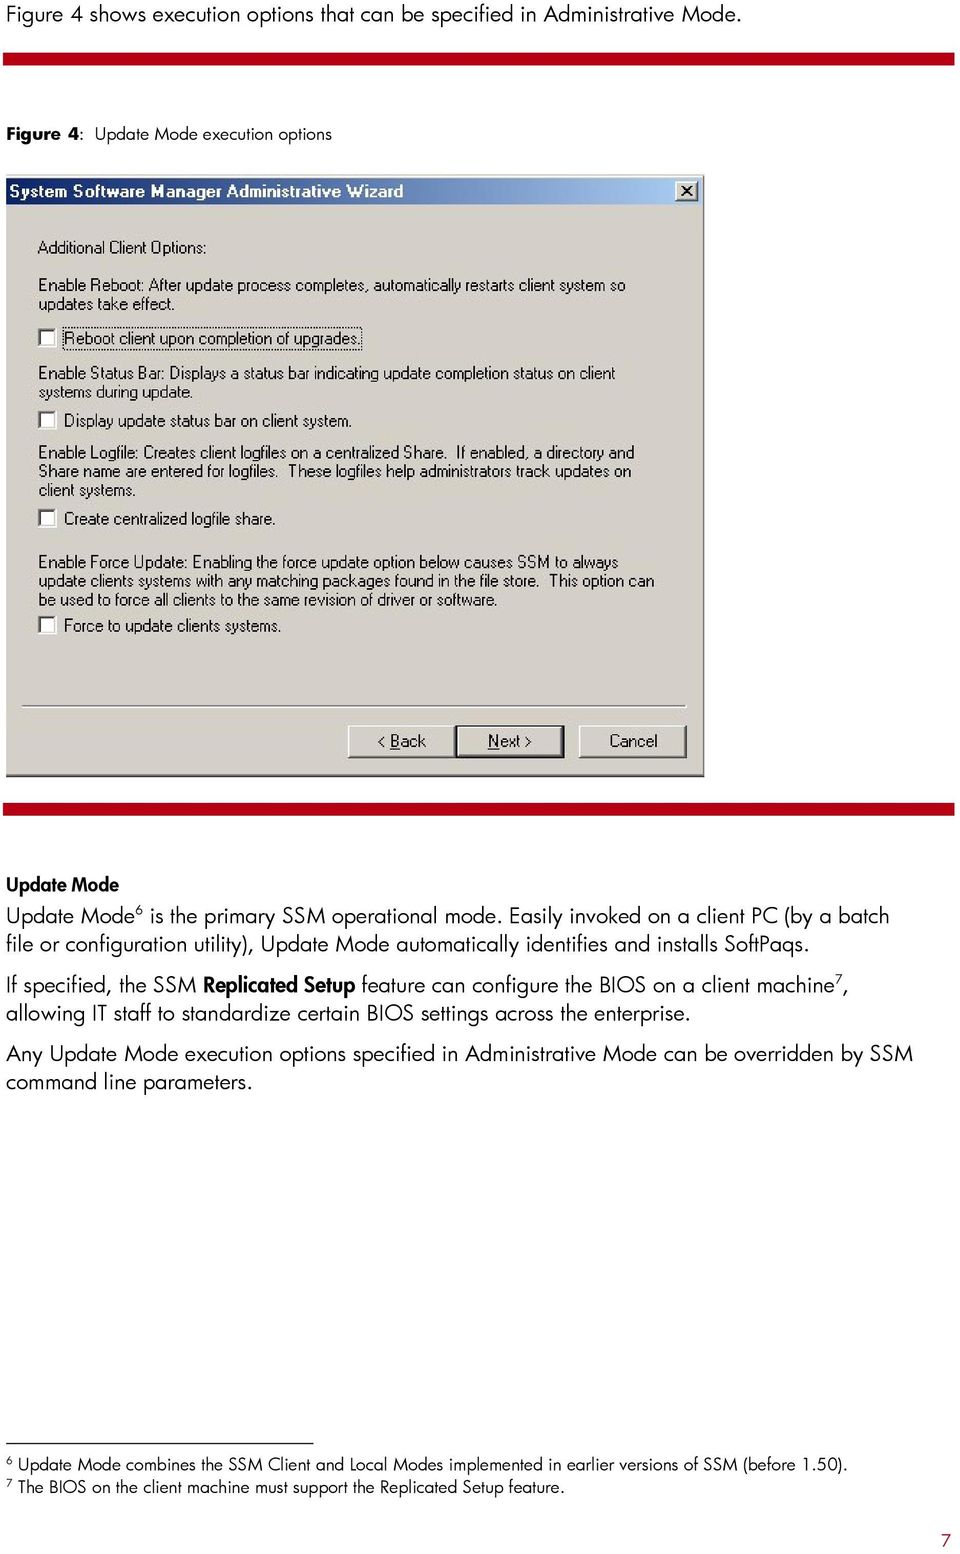 If specified, the SSM Replicated Setup feature can configure the BIOS on a client machine 7, allowing IT staff to standardize certain BIOS settings across the enterprise.